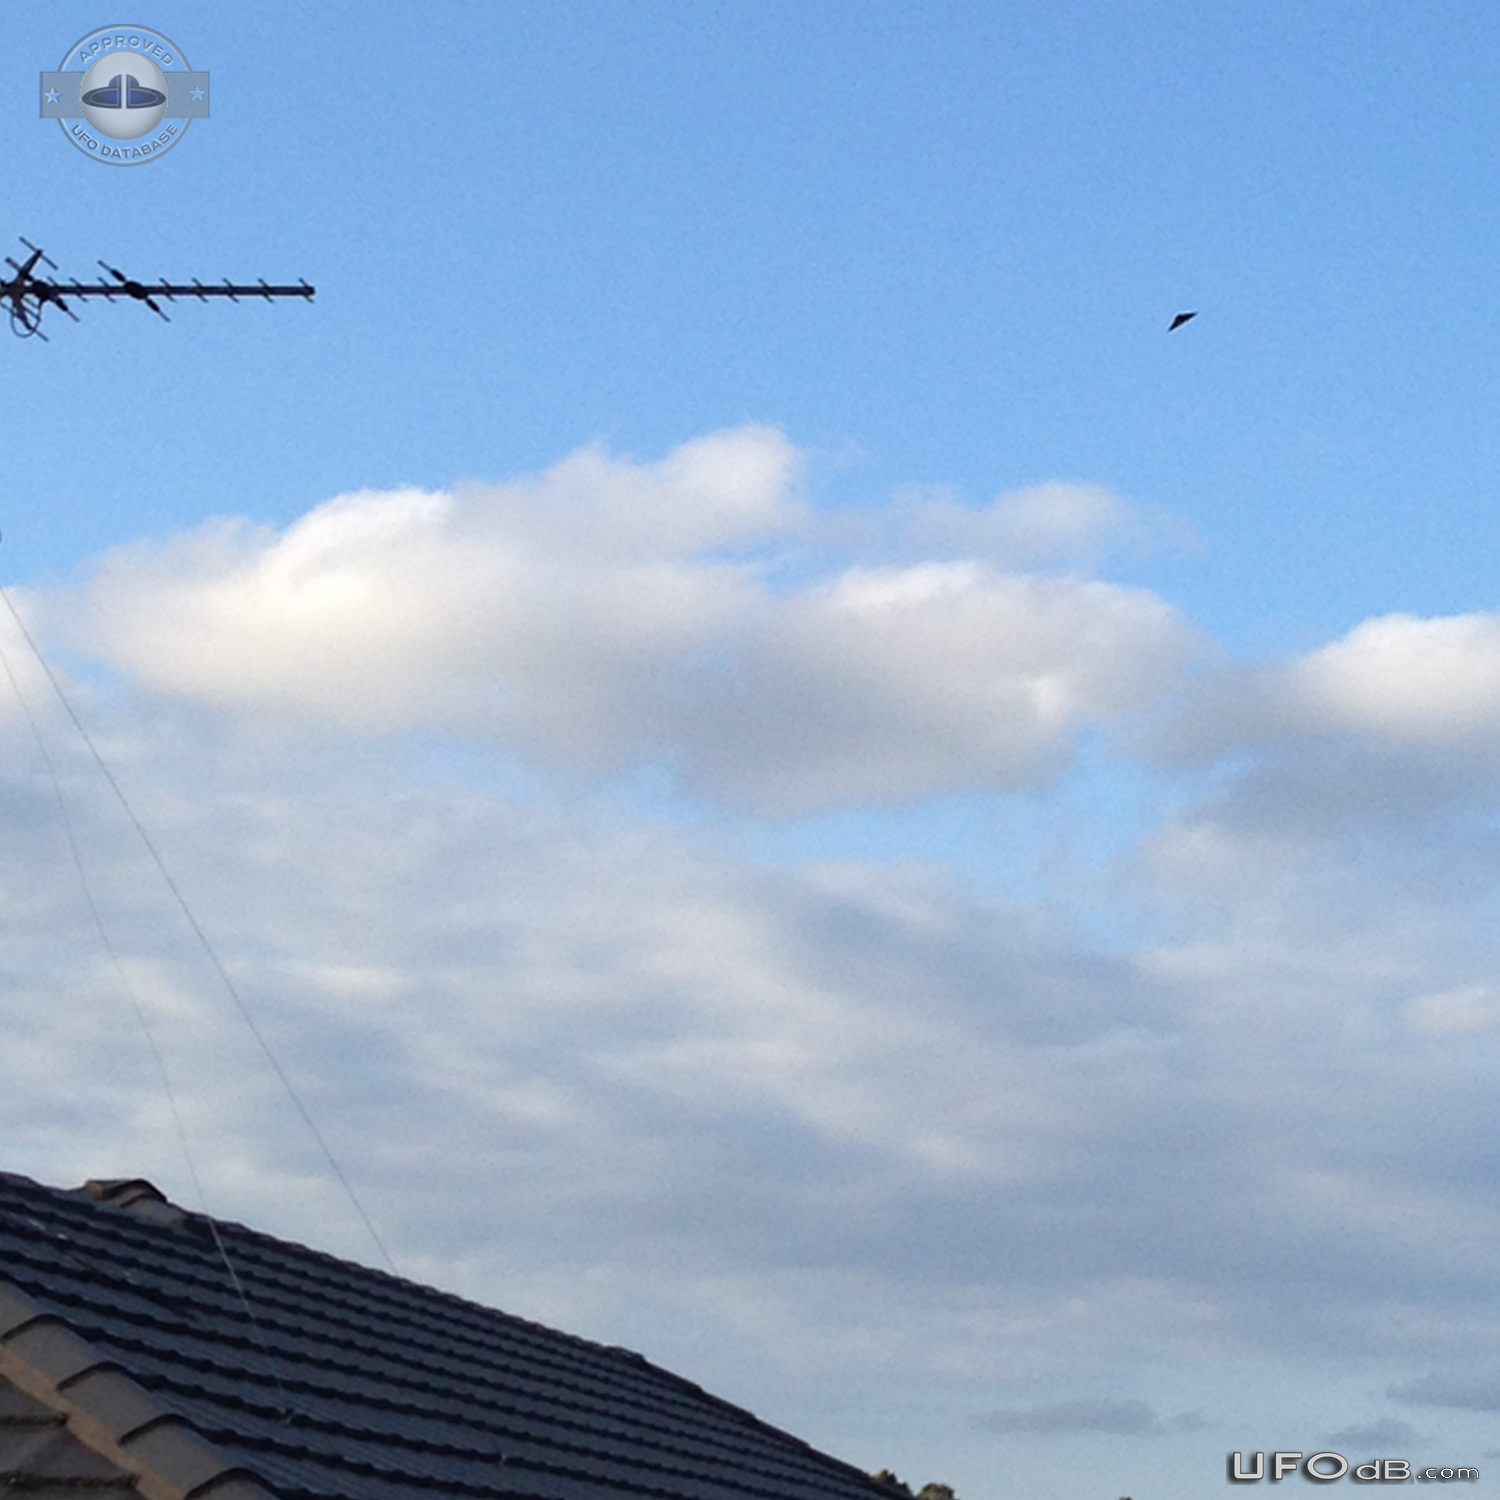 Triangular object hovering in Sky and did not move while observed - Au UFO Picture #736-3